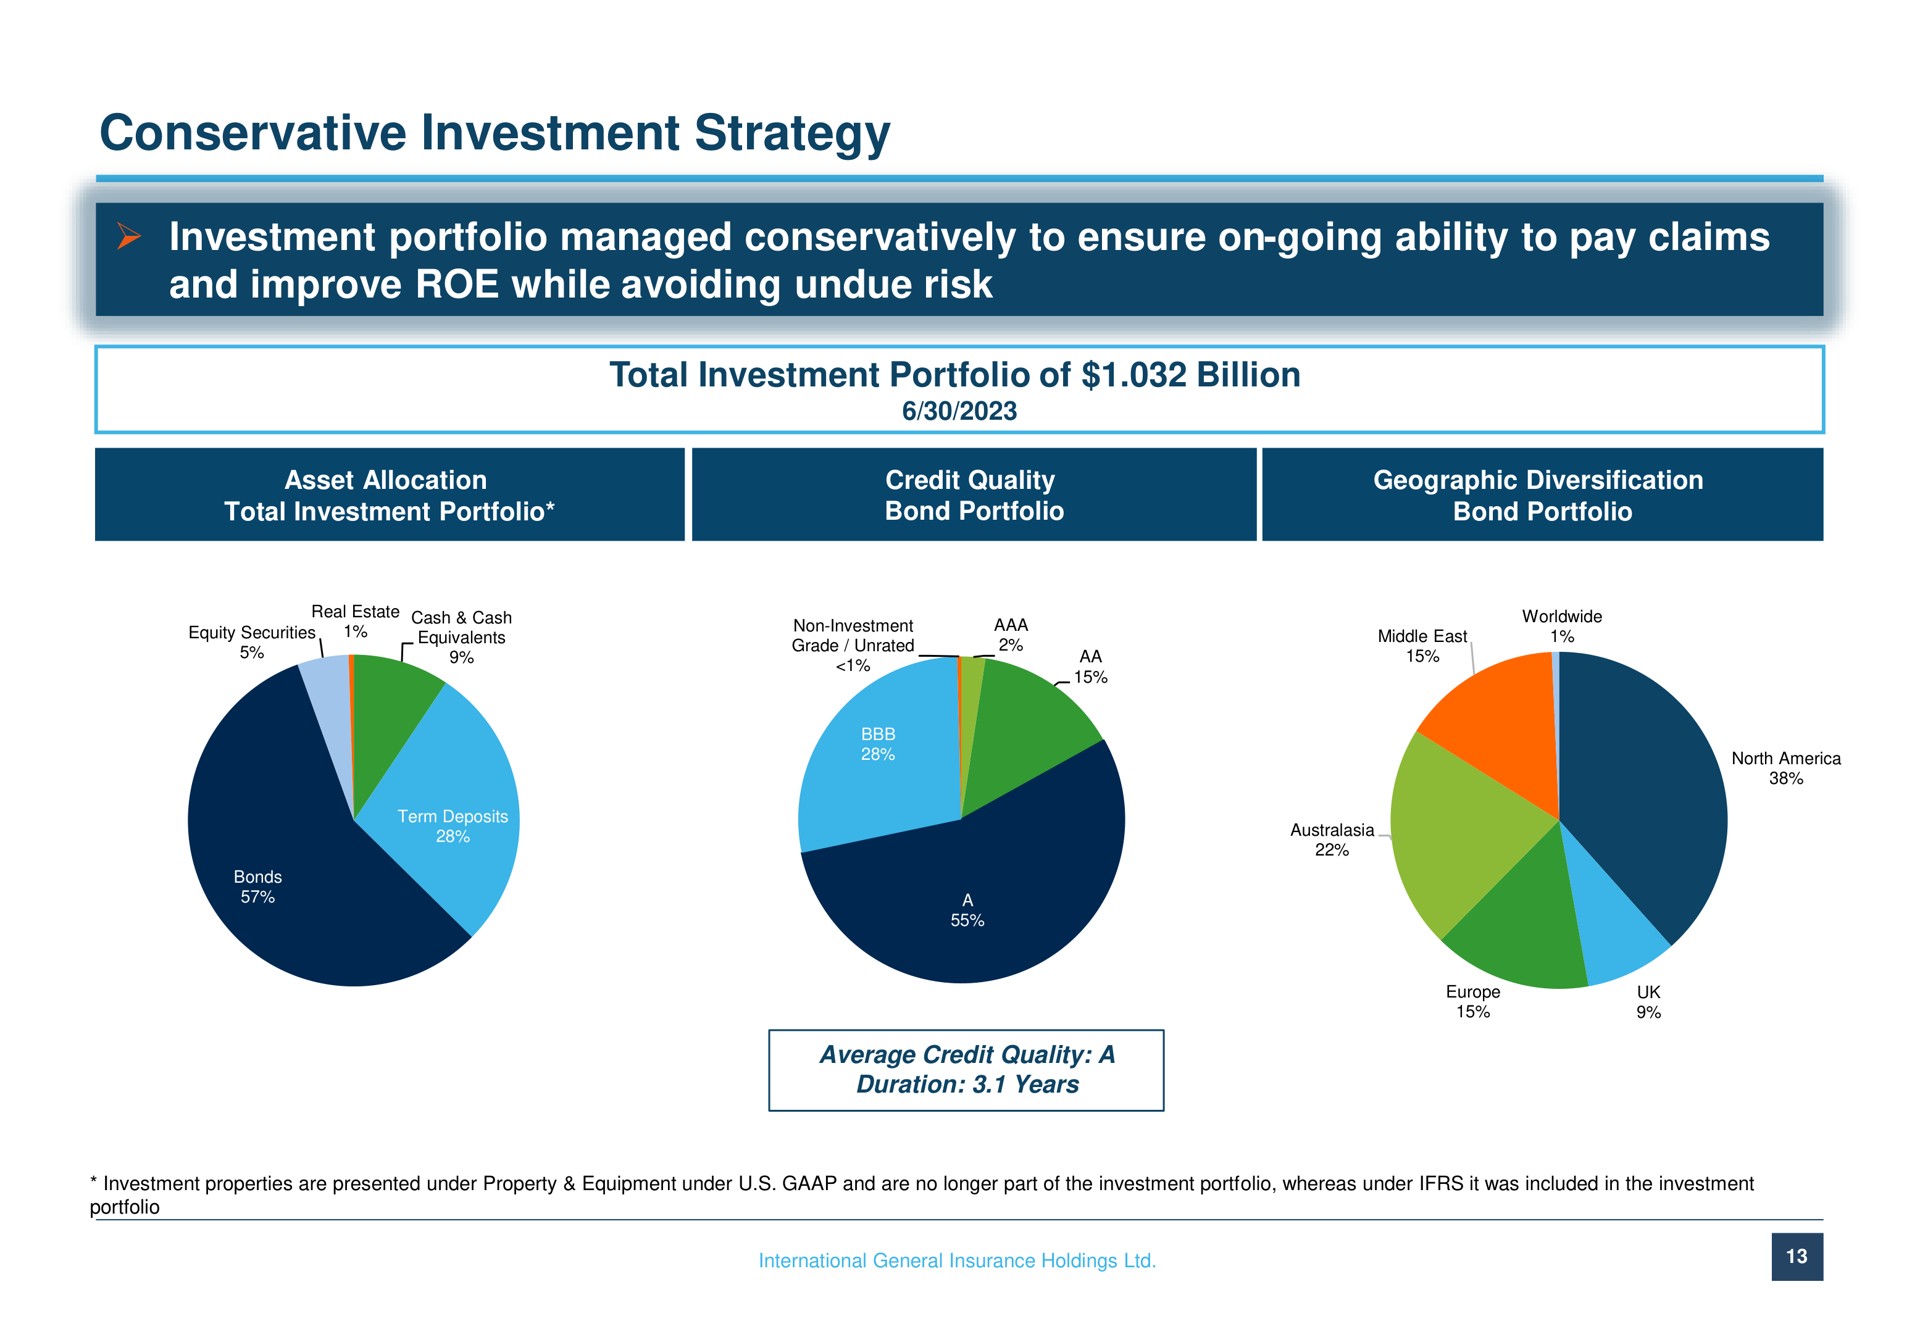 conservative investment strategy investment portfolio managed conservatively to ensure on going ability to pay claims and improve roe while avoiding undue risk | International General Insurance